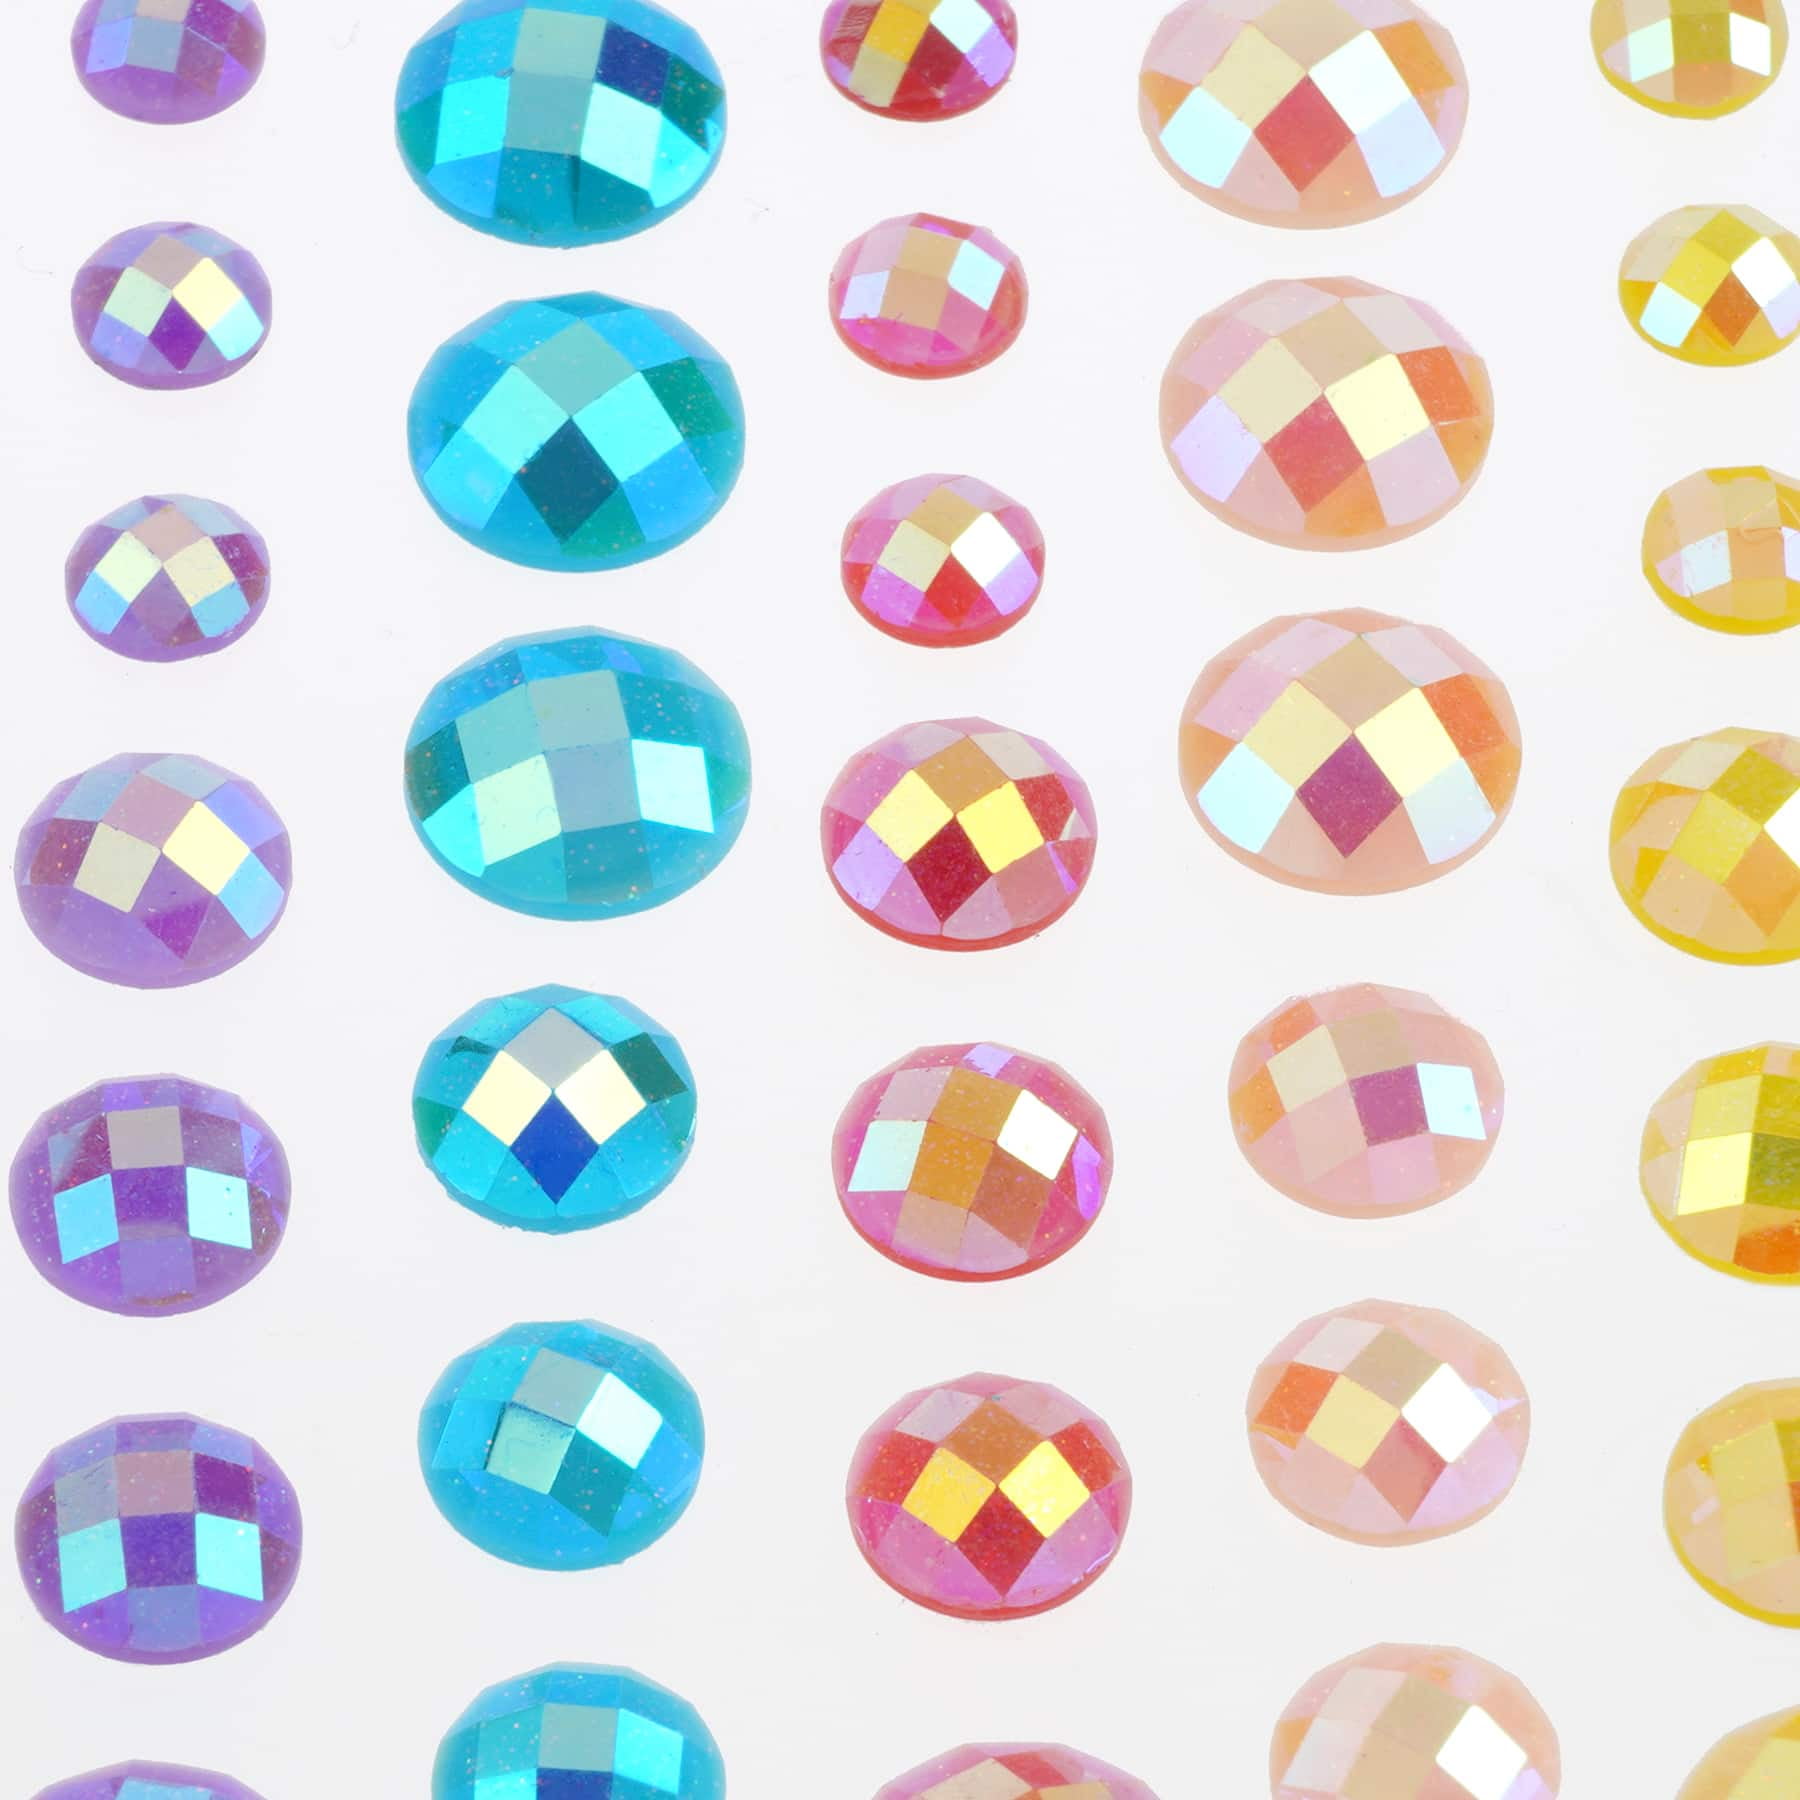 12 Packs: 72 ct. (864 total) Iridescent Rhinestone Stickers by  Recollections™